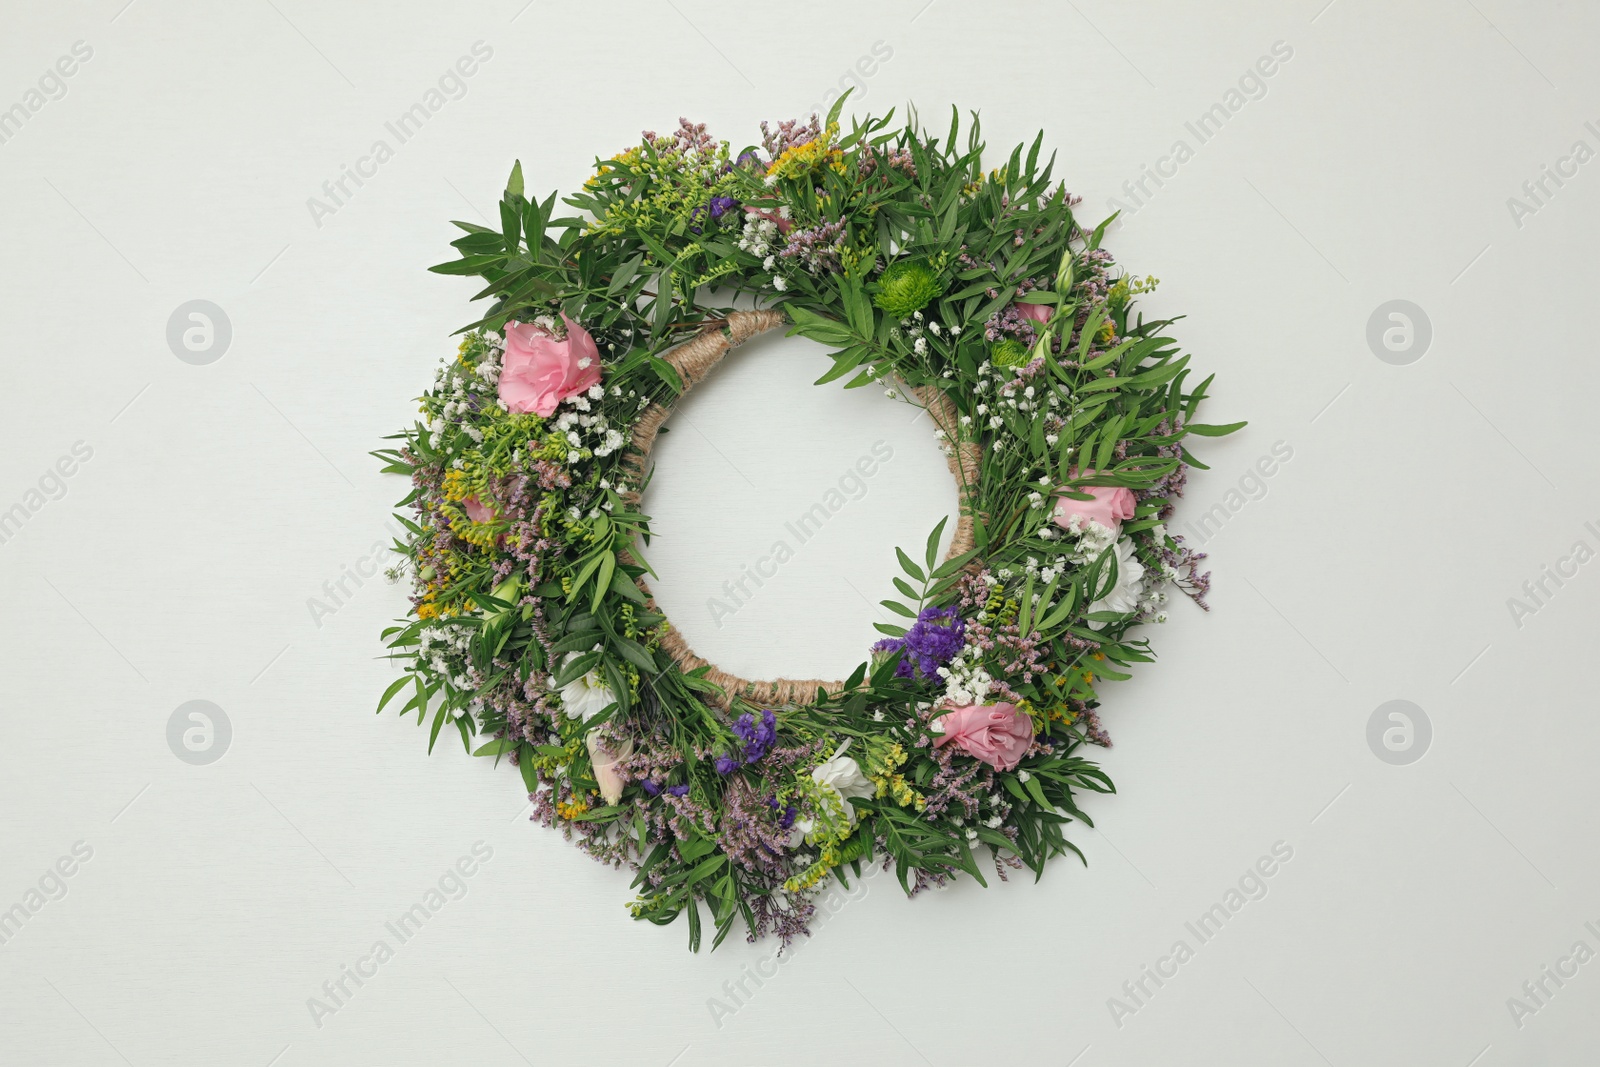 Photo of Wreath made of beautiful flowers on white background, top view